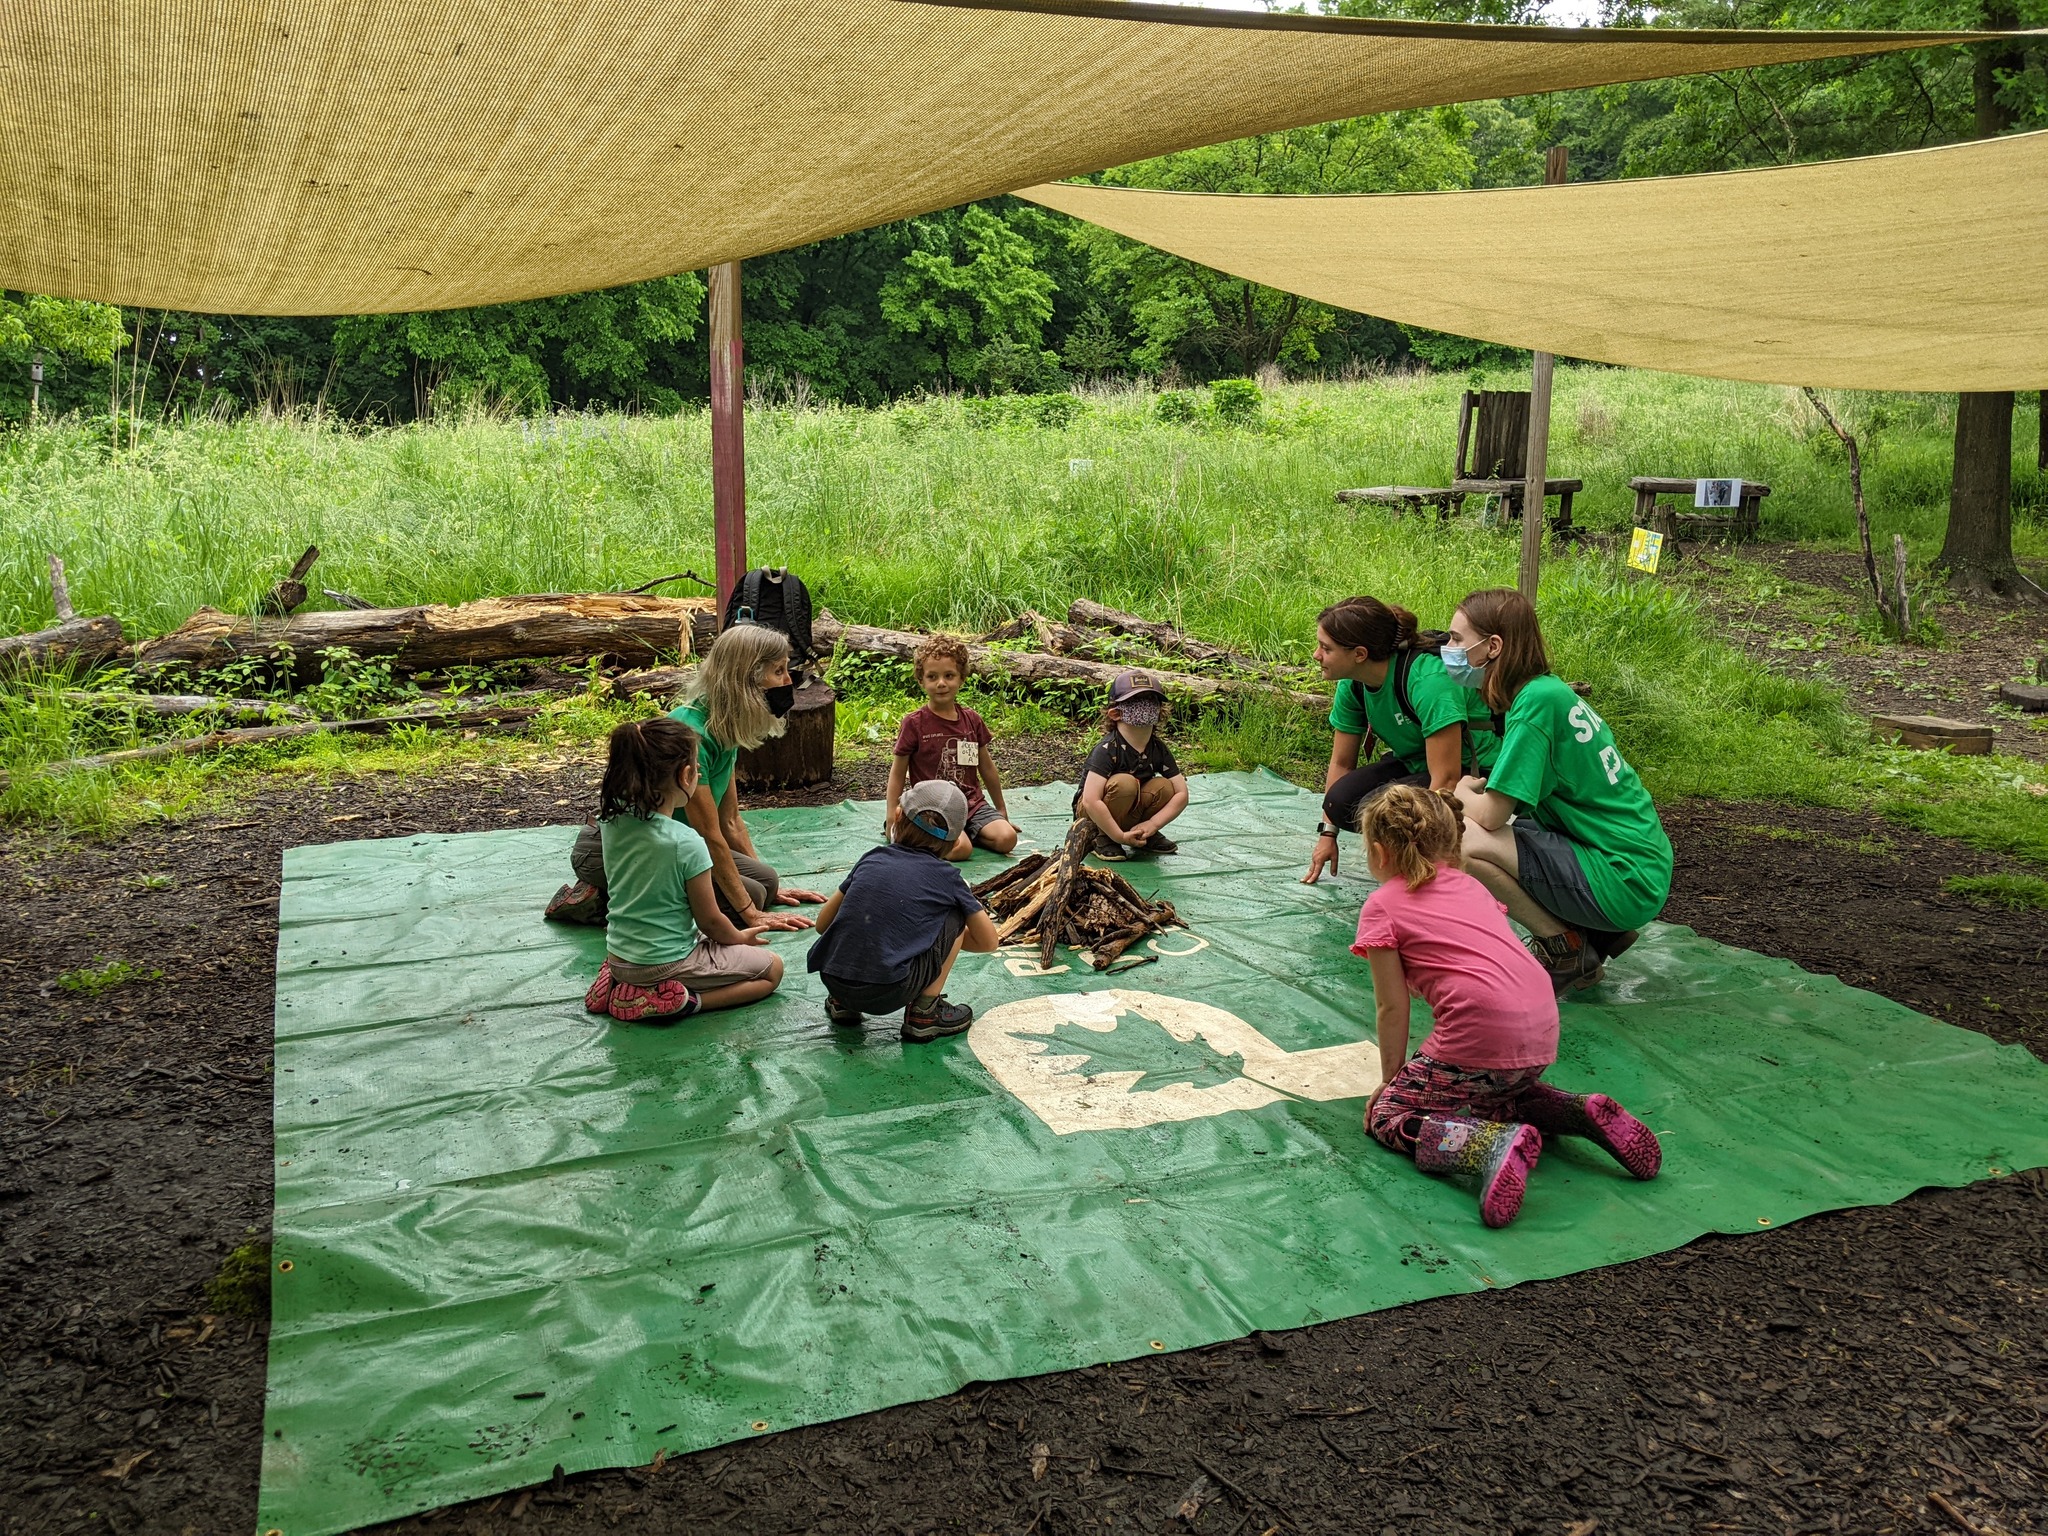 Children and teachers learning outdoors in Frick Park